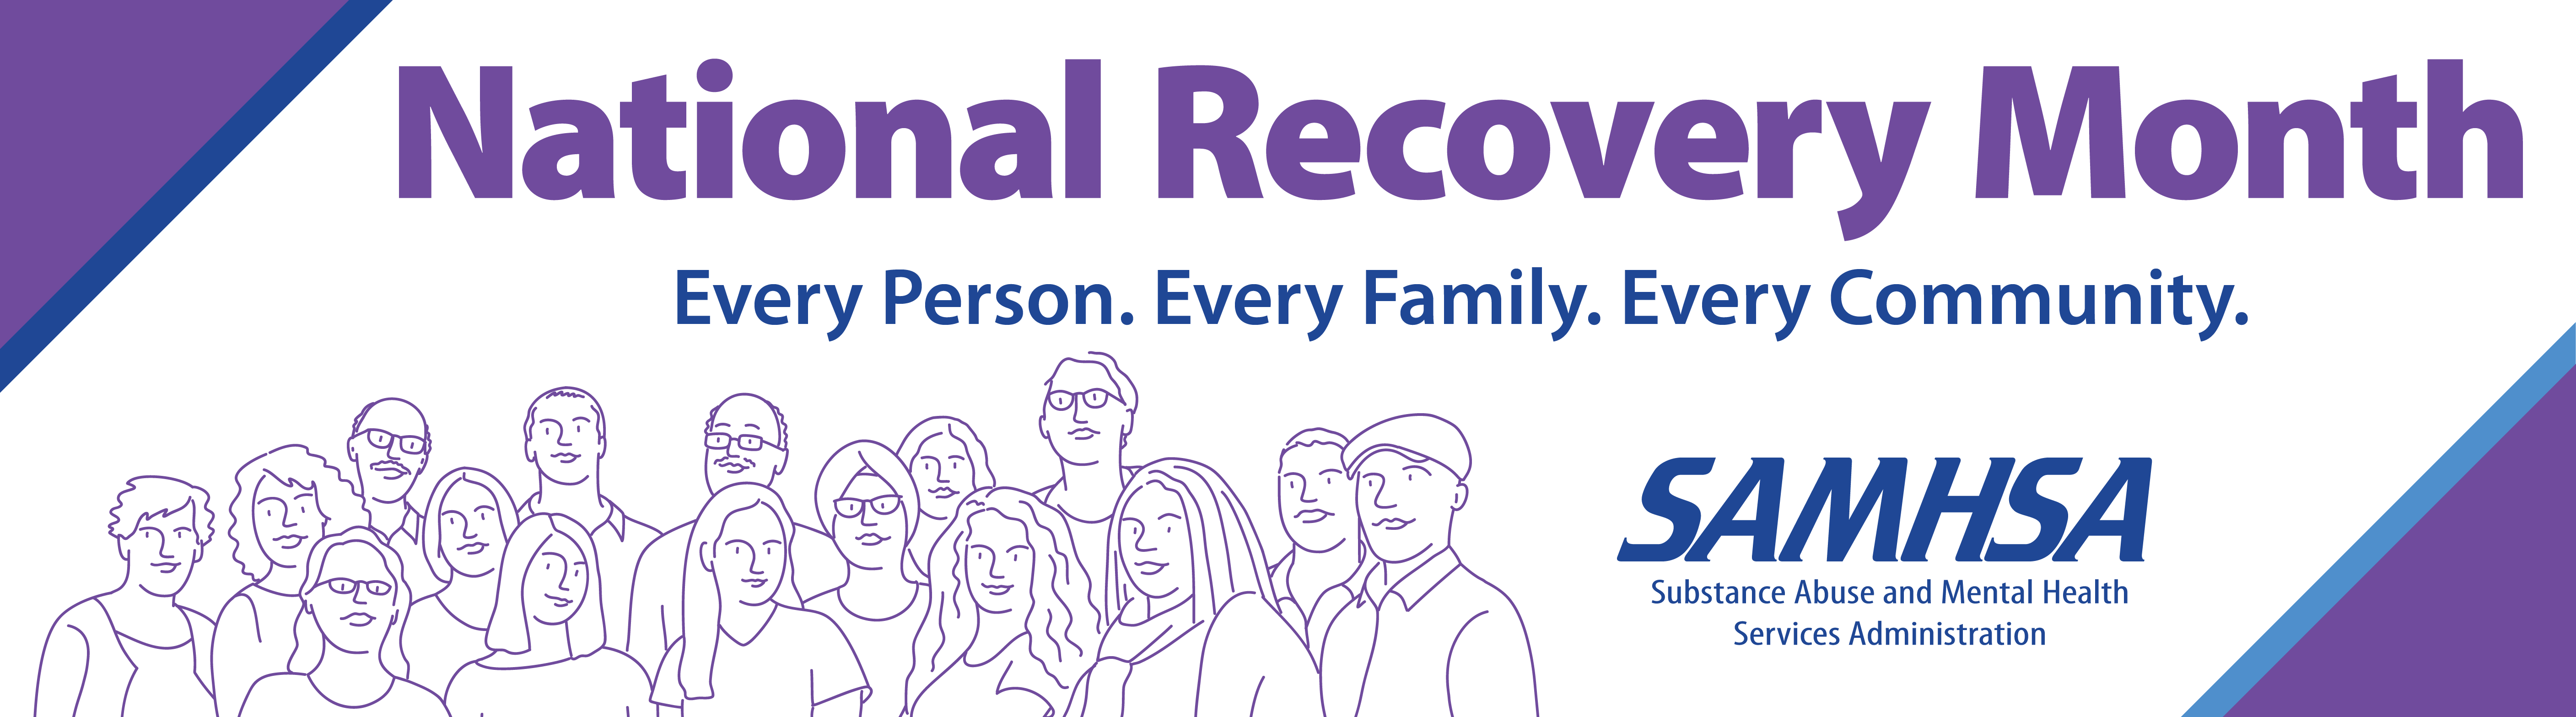 National Recovery Month, Every Person. Every Family. Every Community. SAMHSA